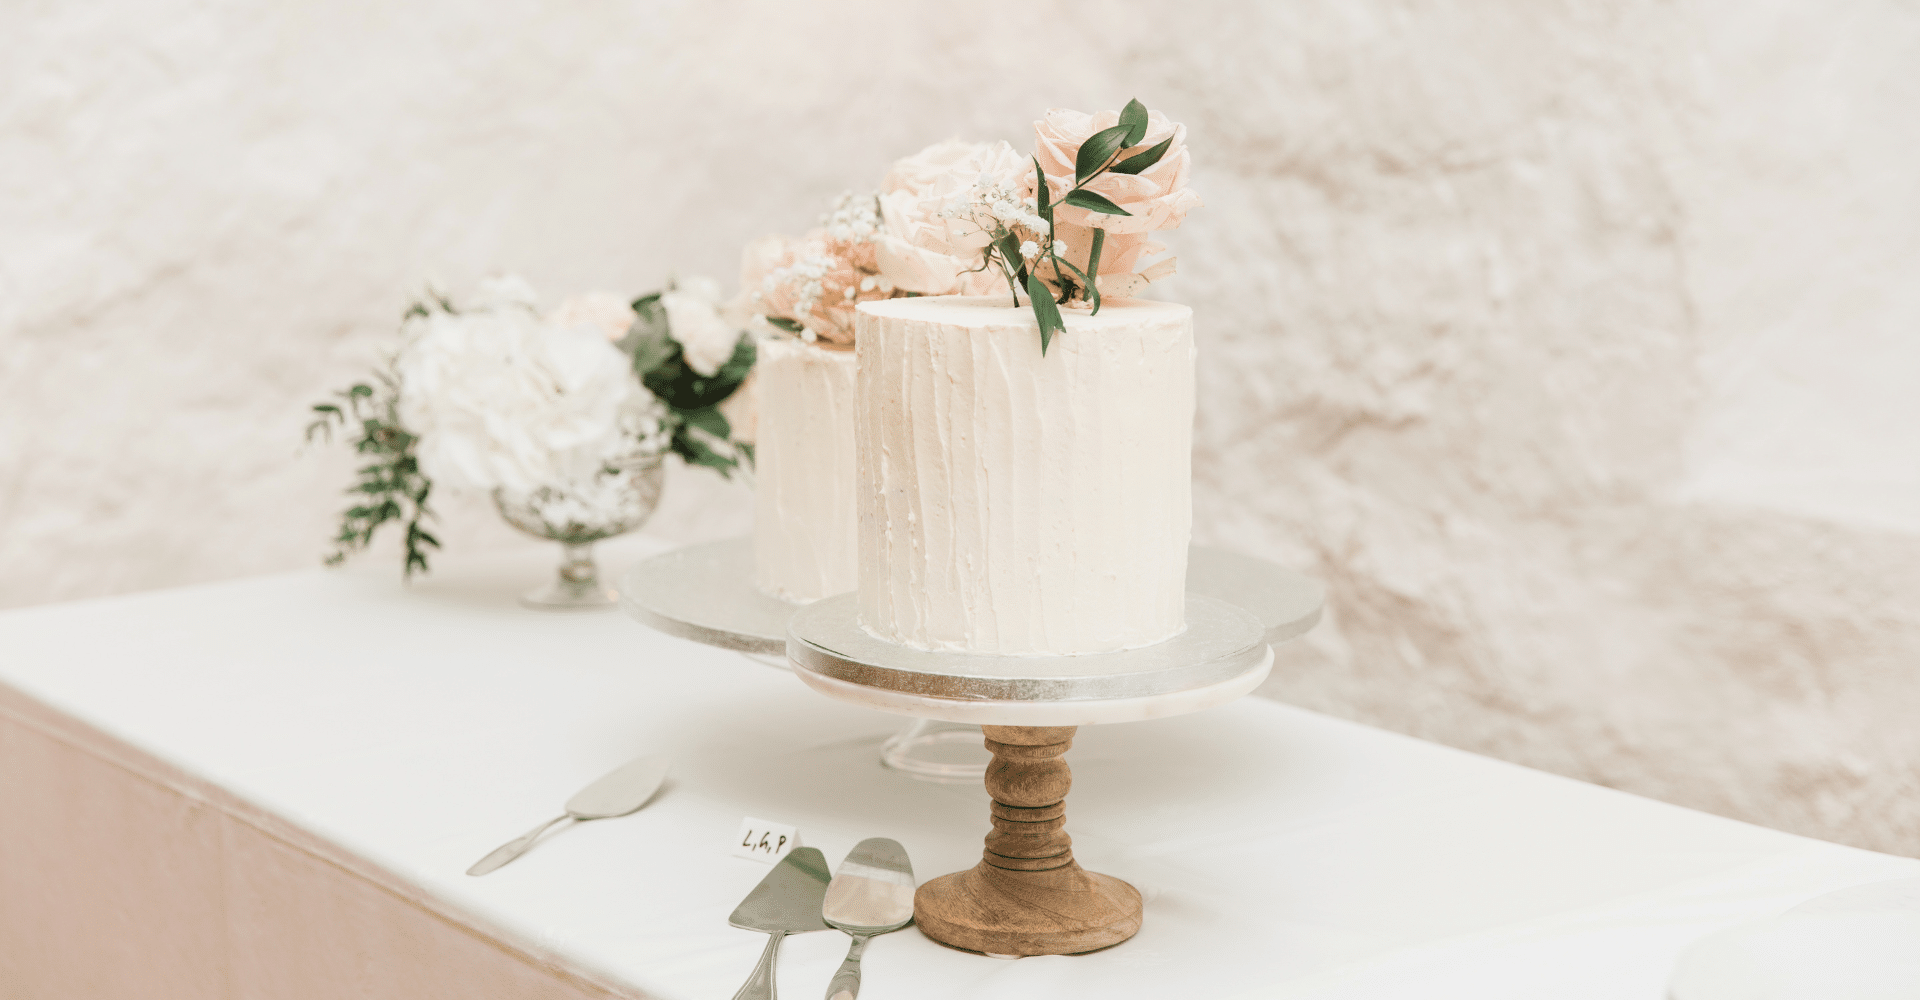 12 Best Single-Tier Wedding Cake Recipe Ideas For Your Special Day